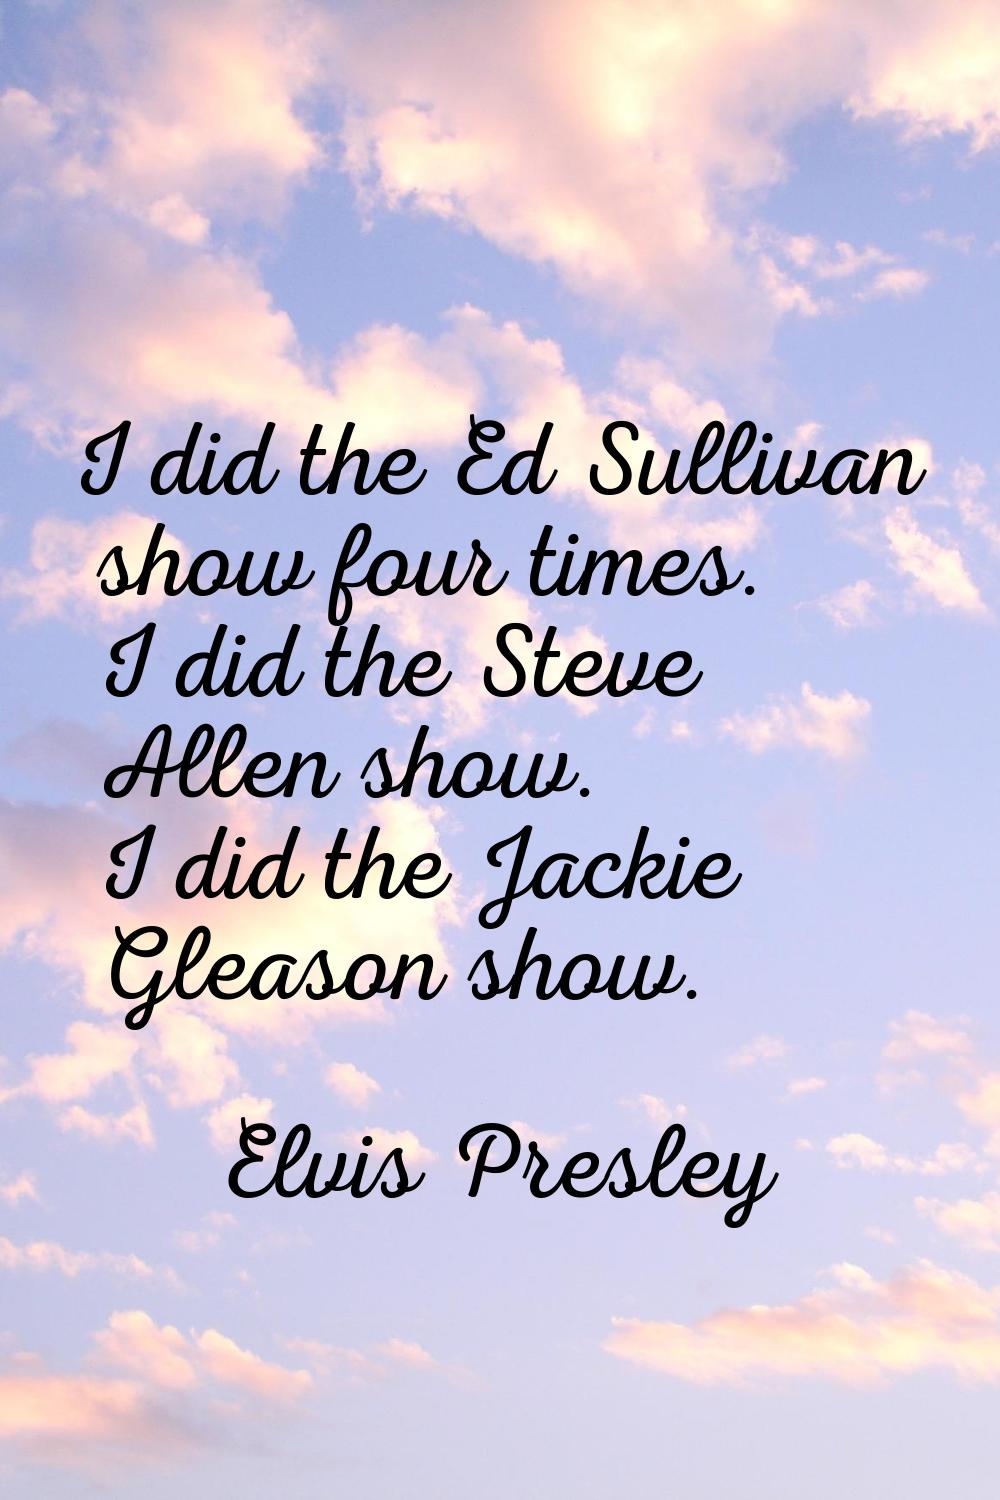 I did the Ed Sullivan show four times. I did the Steve Allen show. I did the Jackie Gleason show.